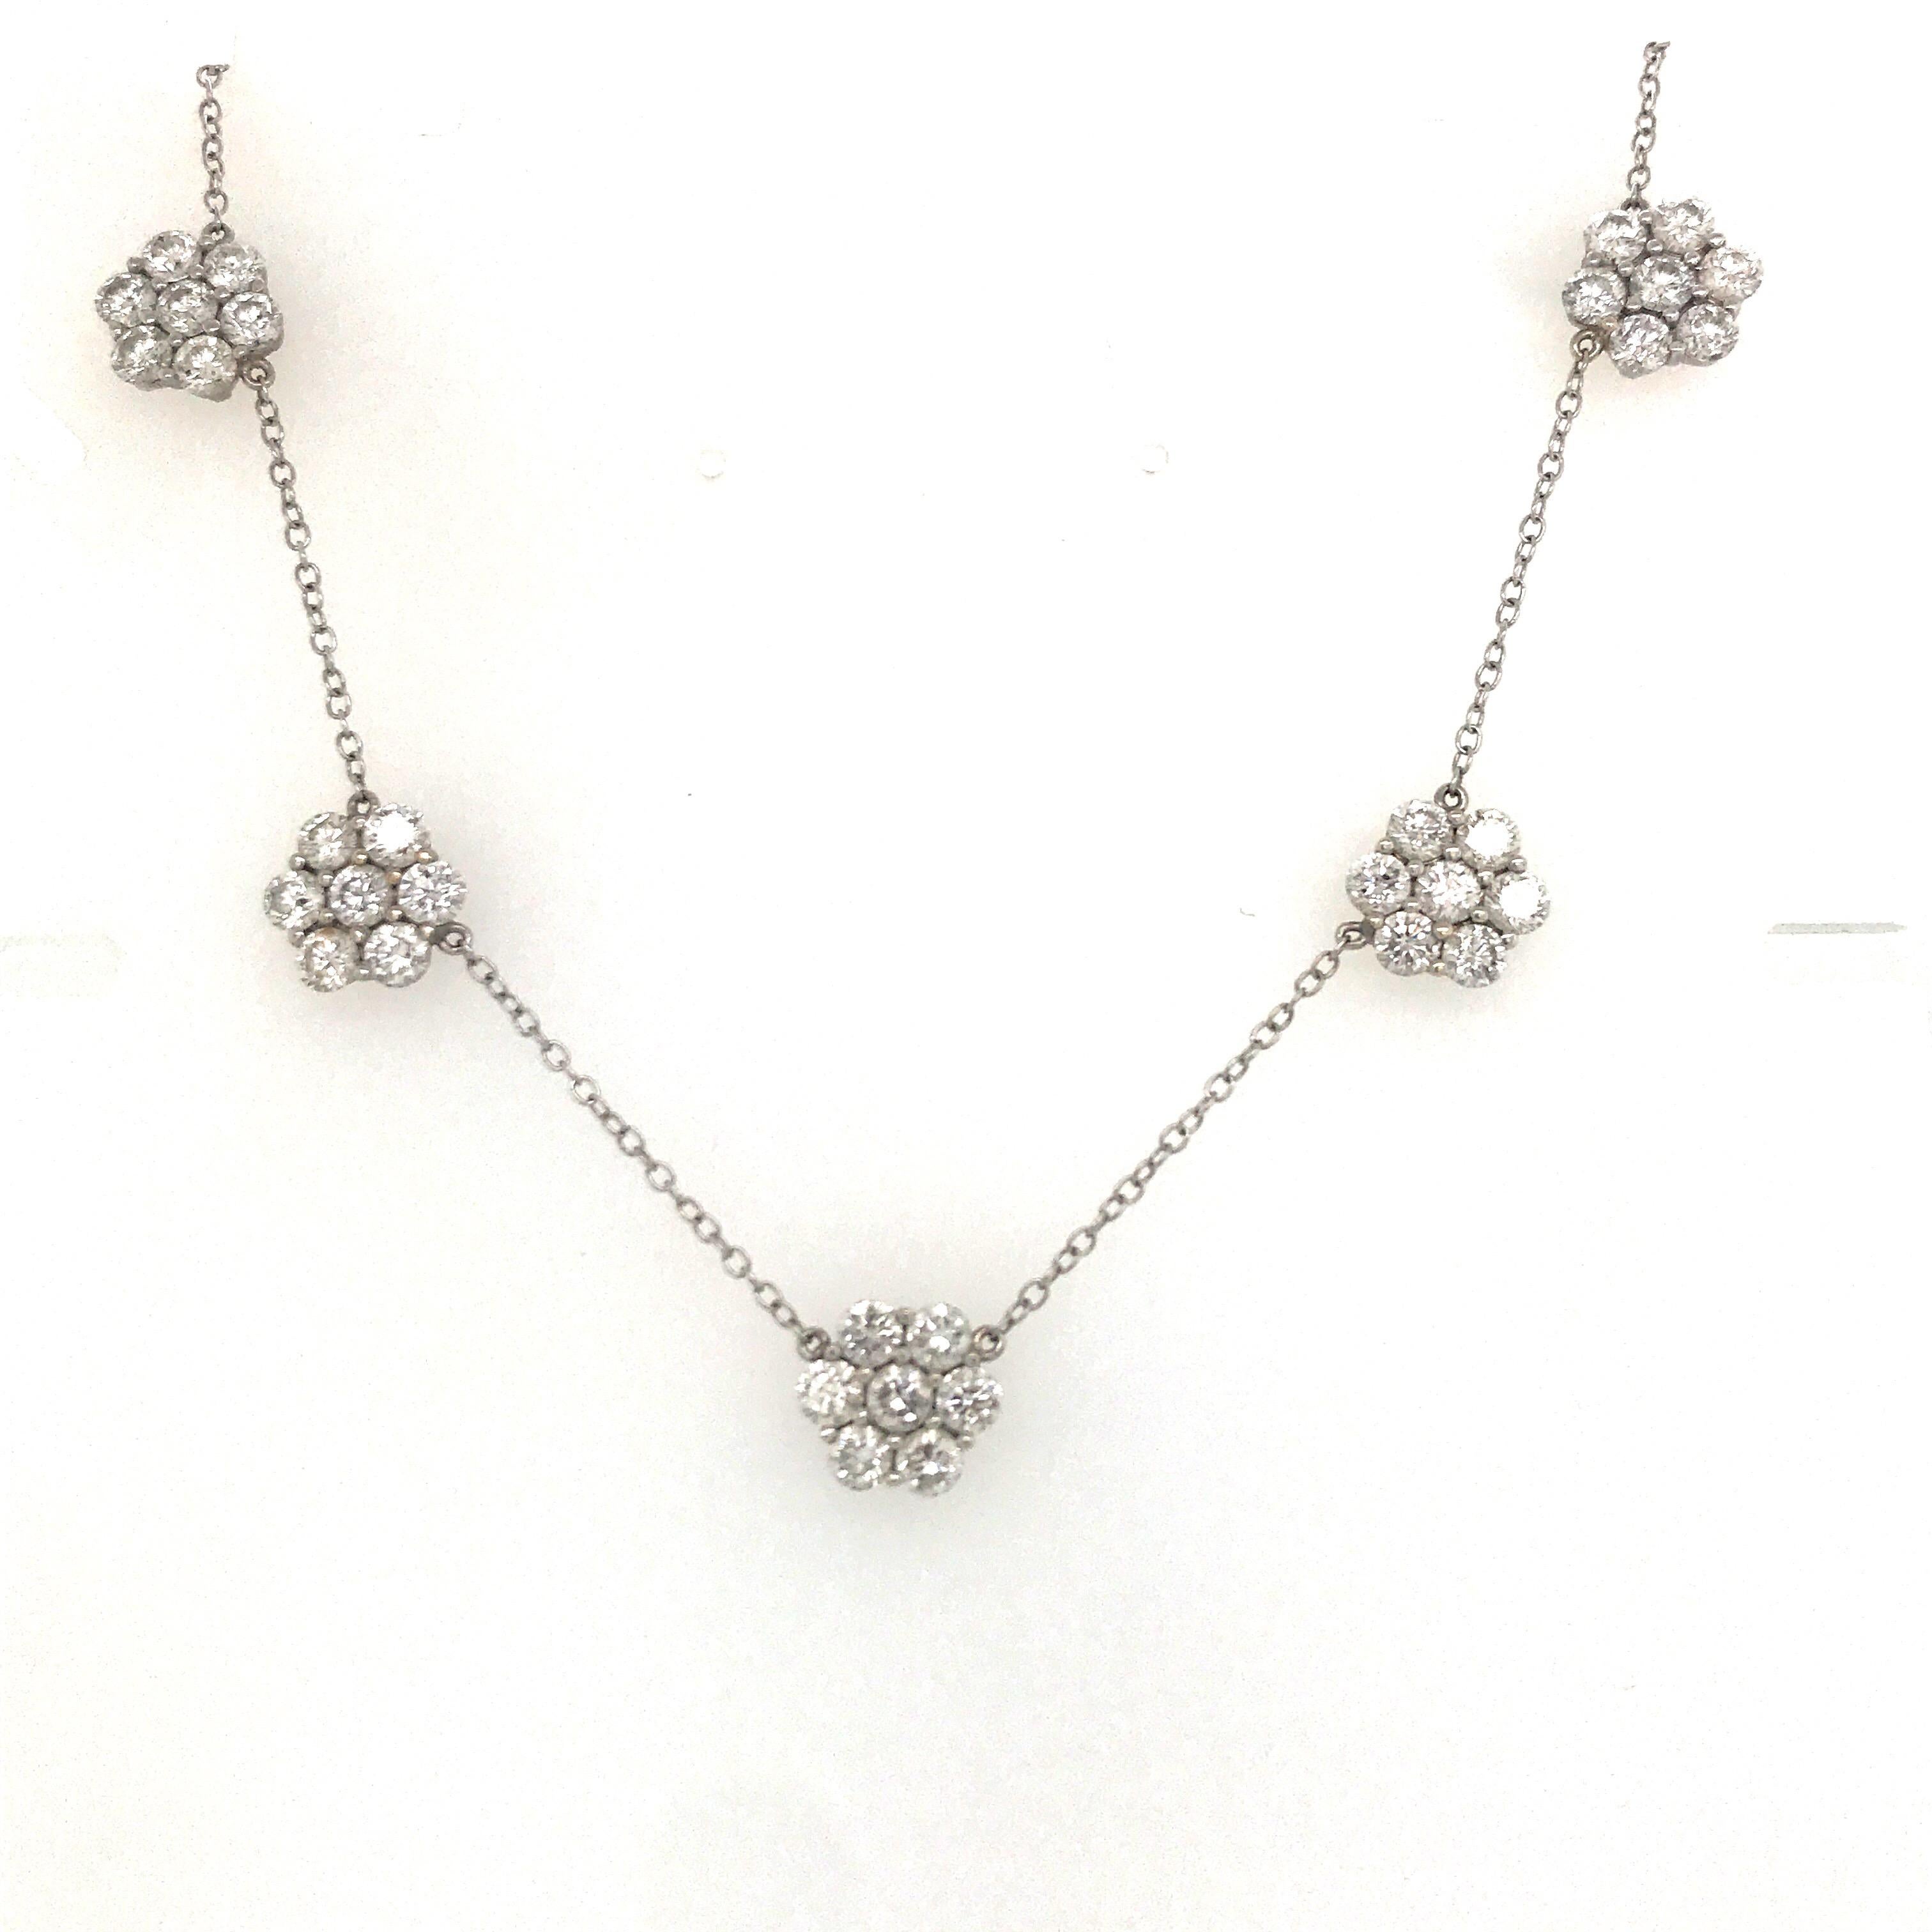 18K White gold necklace featuring 5 round brilliant clusters weighing 5.25 carats, average stone 0.15 carats.

Available in single pendant, or three floral pendant.

Customize your very own. Email Harbor Diamonds for quote.